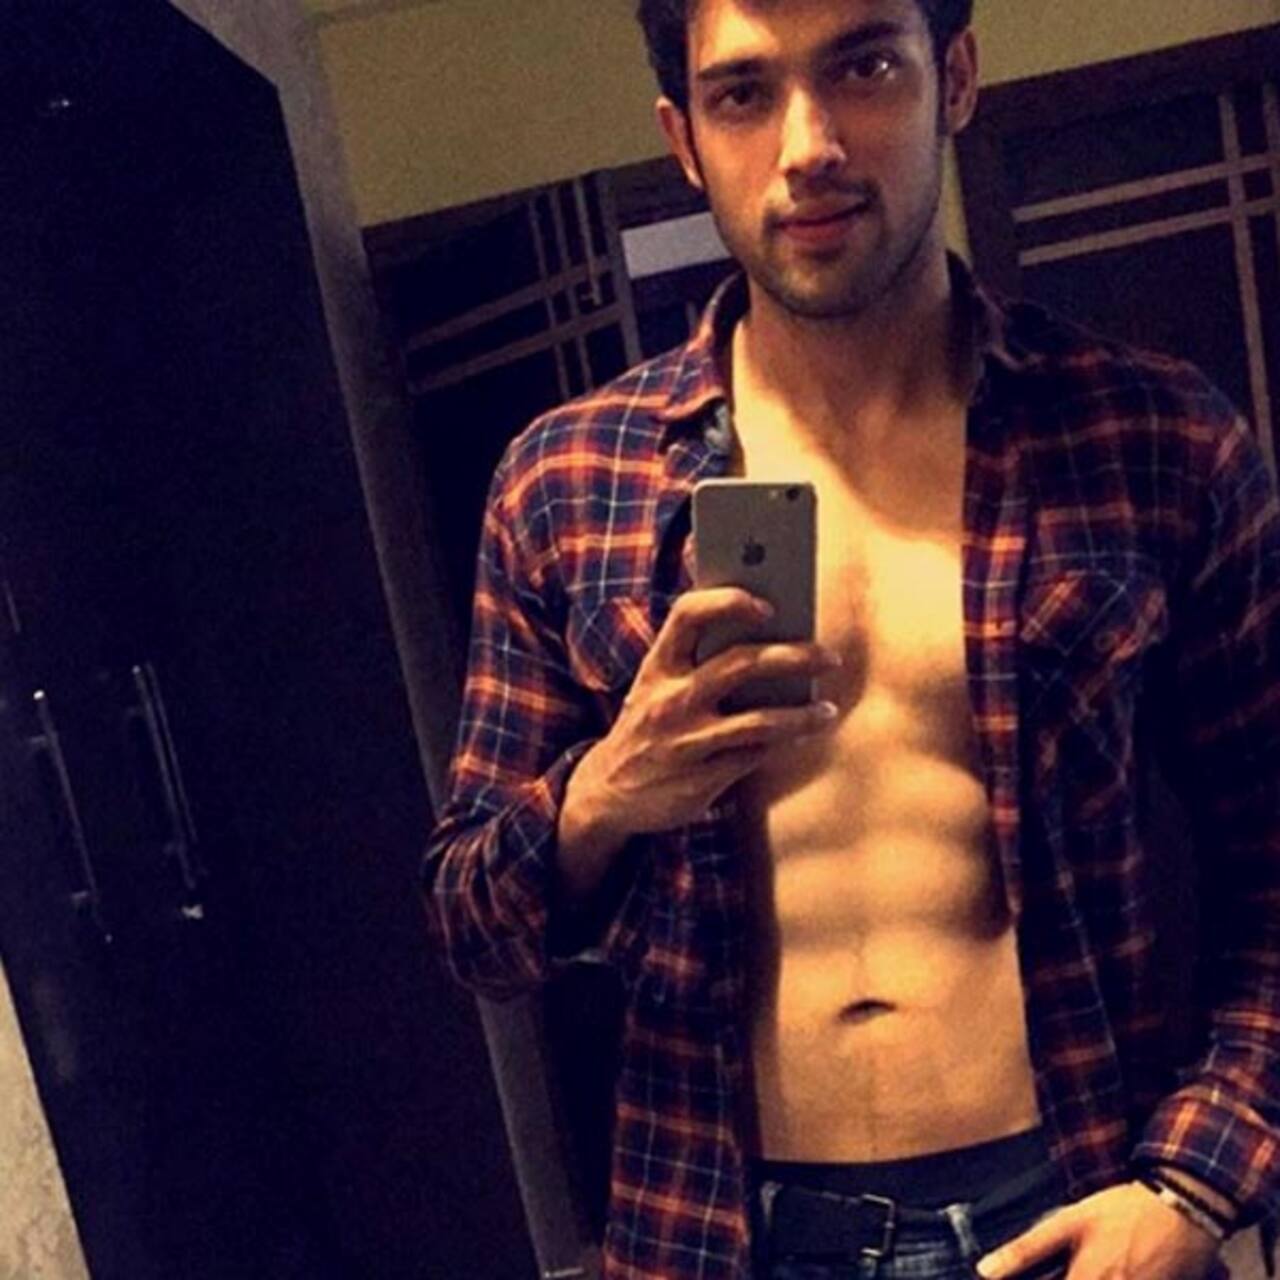 Pics Of Parth Samthaan That Will Make You Drool Over The New Television Sensation